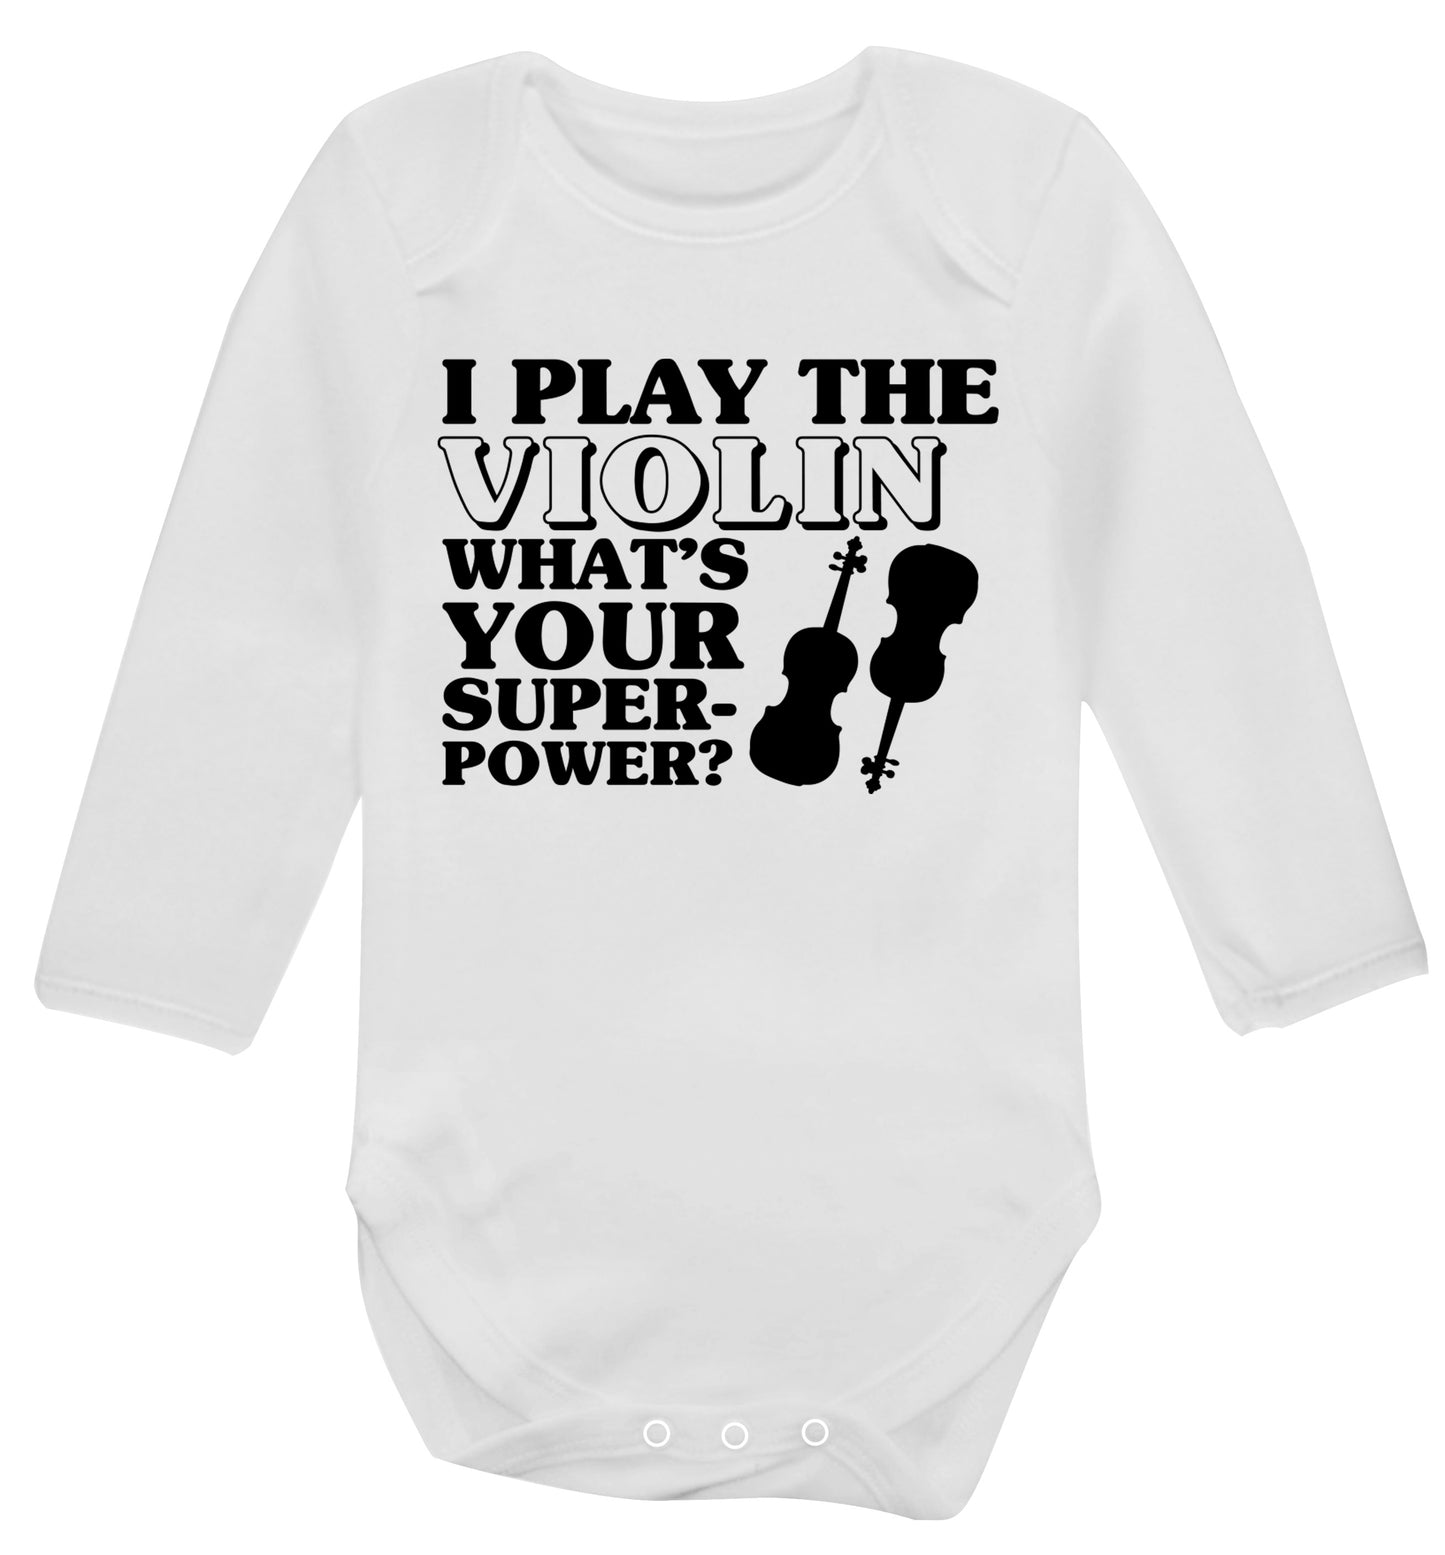 I Play Violin What's Your Superpower? Baby Vest long sleeved white 6-12 months